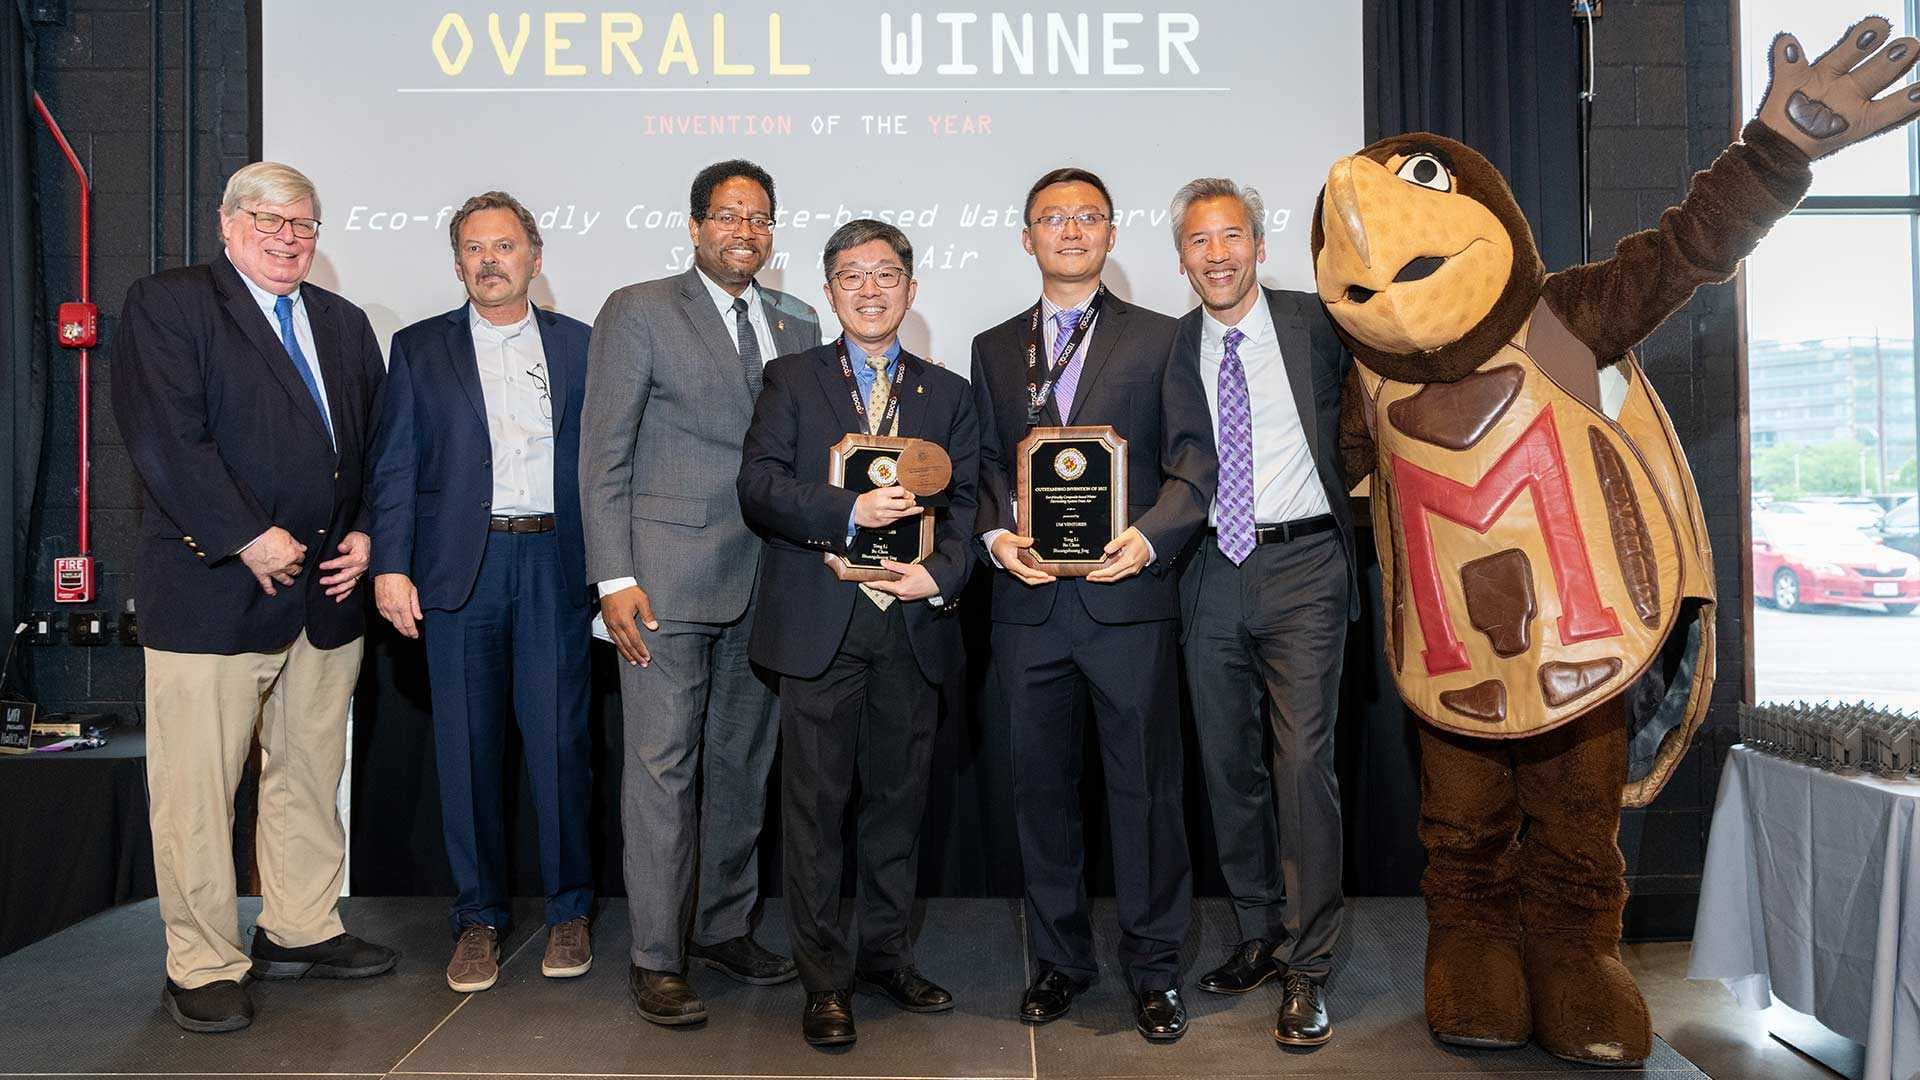 UMD Vice President for Research Gregory F. Ball, UM Ventures, College Park Director Ken Porter, President Darryll J. Pines, Invention of the Year overall winners Professor Teng Li and postdoctoral researcher Bo Chen, Interim Chief Innovation Officer Dean Chang and Testudo celebrate Tuesday at Innovate Maryland